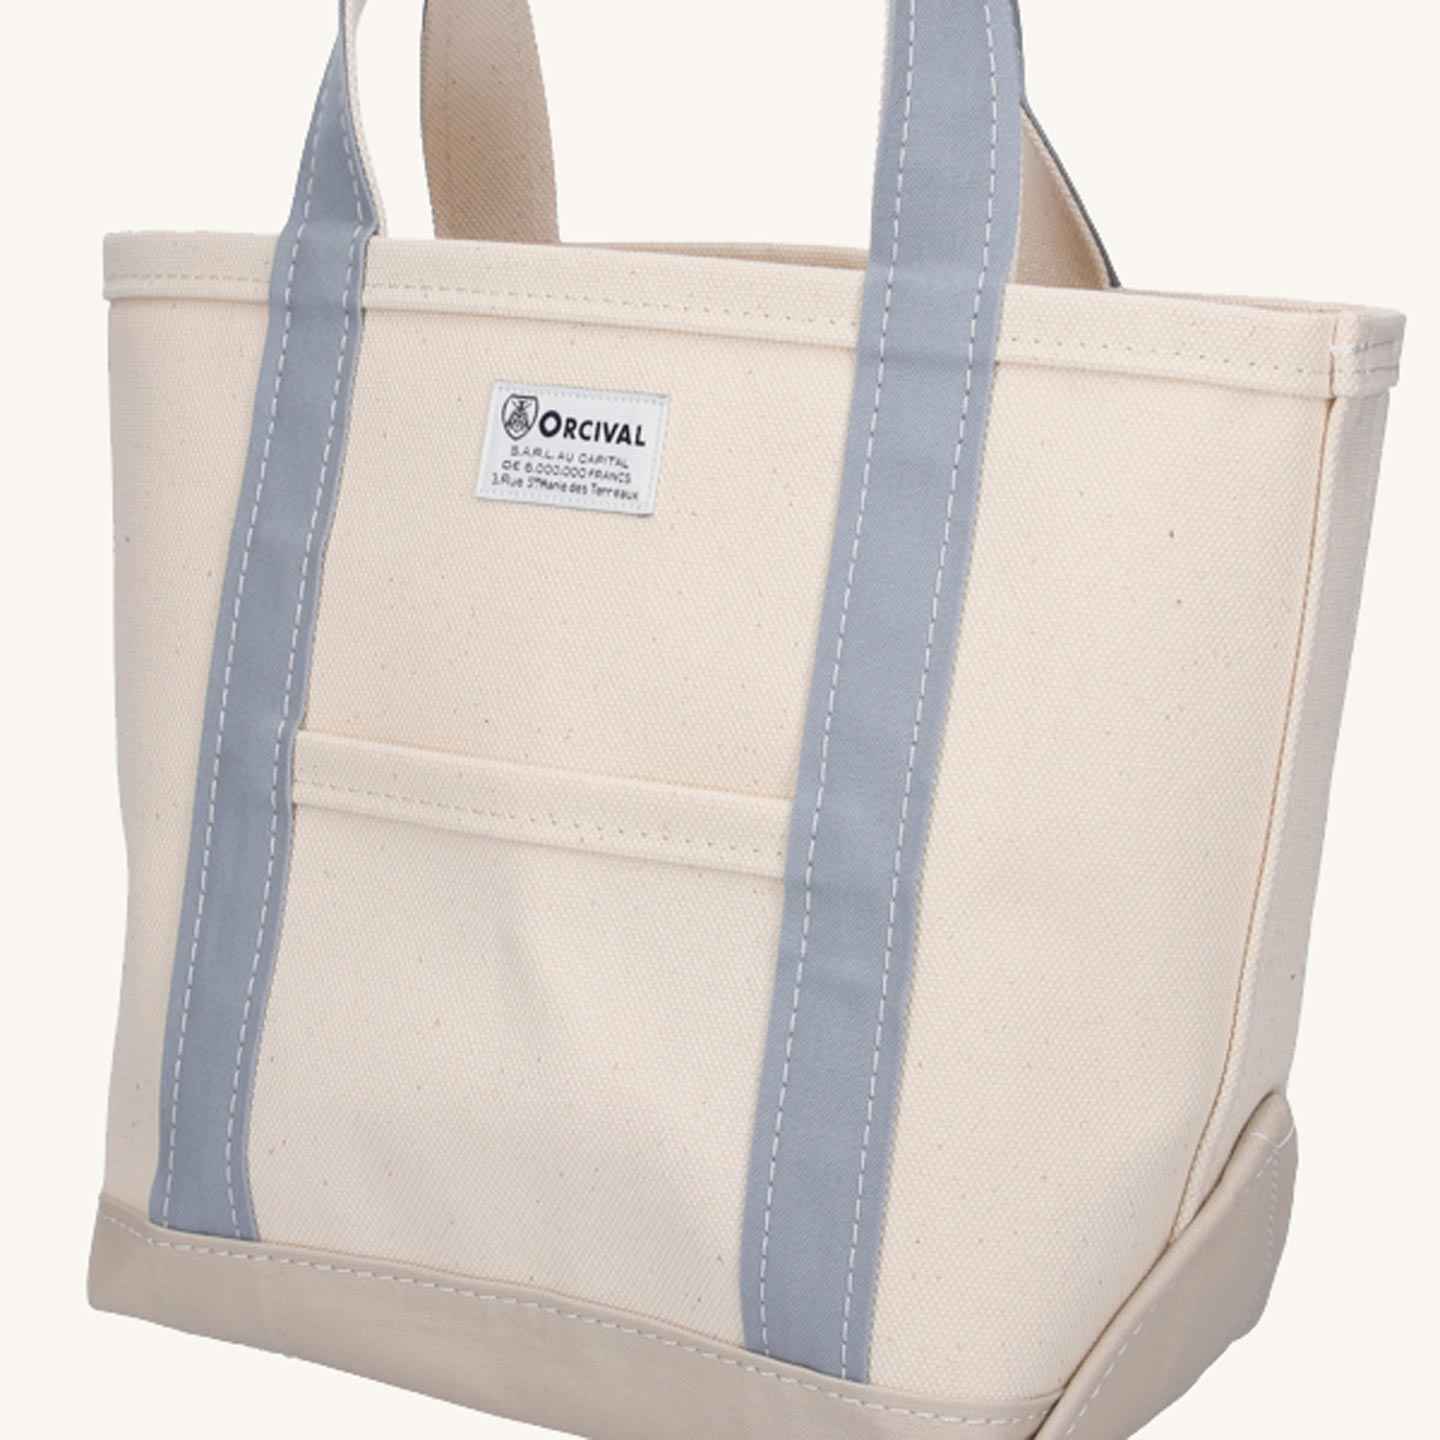 The Ecru / Blue Grey / Sand Beige tote bag, in a medium size, by Orcival